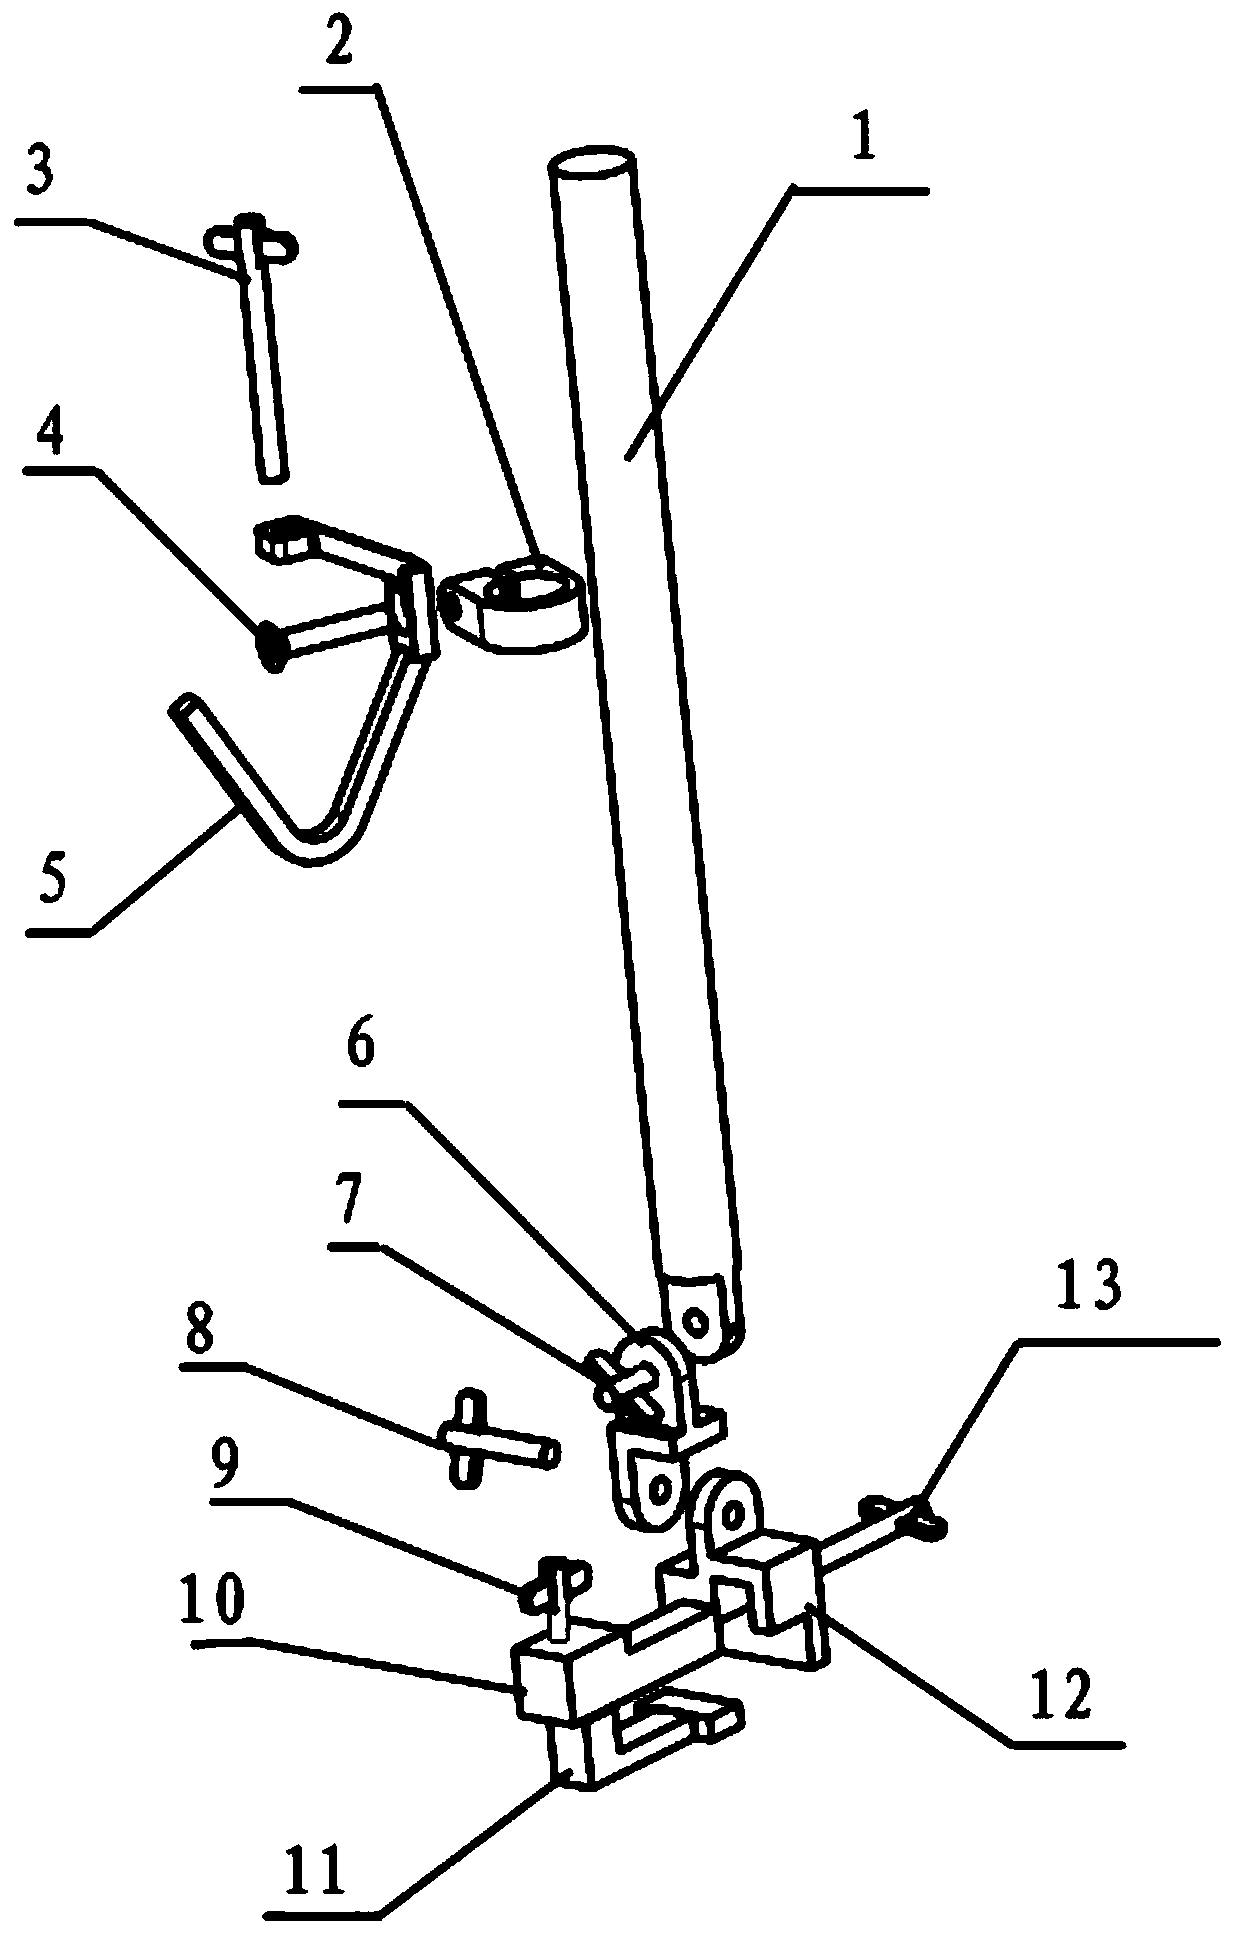 Welding-fixing device for circular connectors